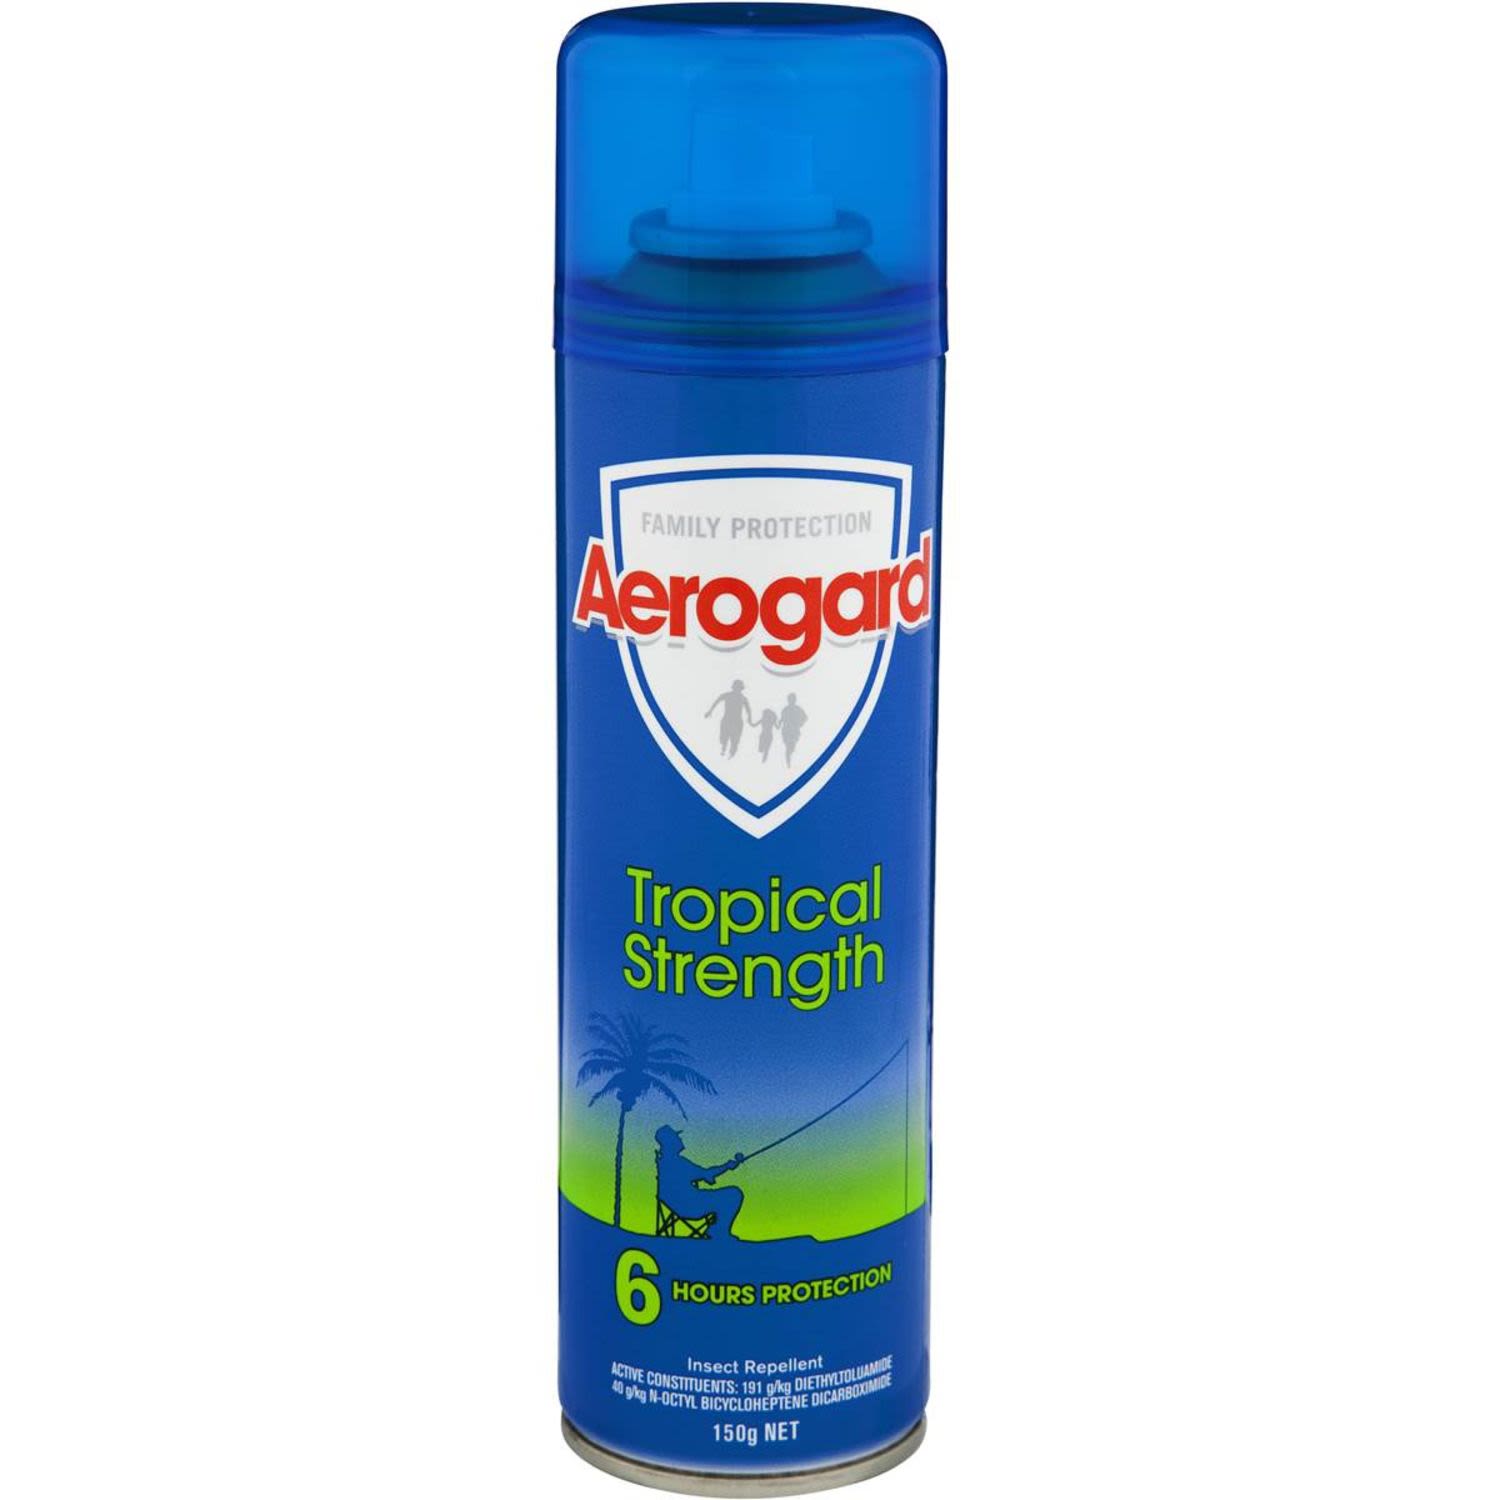 <p>Aerogard Tropical Strength</p><p>- 6 hour protection against mosquitoes.<br />- Also repels flies, sandflies, leeches, ticks and other annoying and biting insects.<br />- Helps to protect you and your family against disease carrying insects including mosquitoes that may spread Malaria, Ross River Fever and Dengue Fever.</p><p>Additional repellency can be gained by lightly spraying surfaces such as picnic rug, beach umbrella & towel.</p><br /> <br /> <br /><br />Country of Origin: Made in Australia from imported and local ingredients